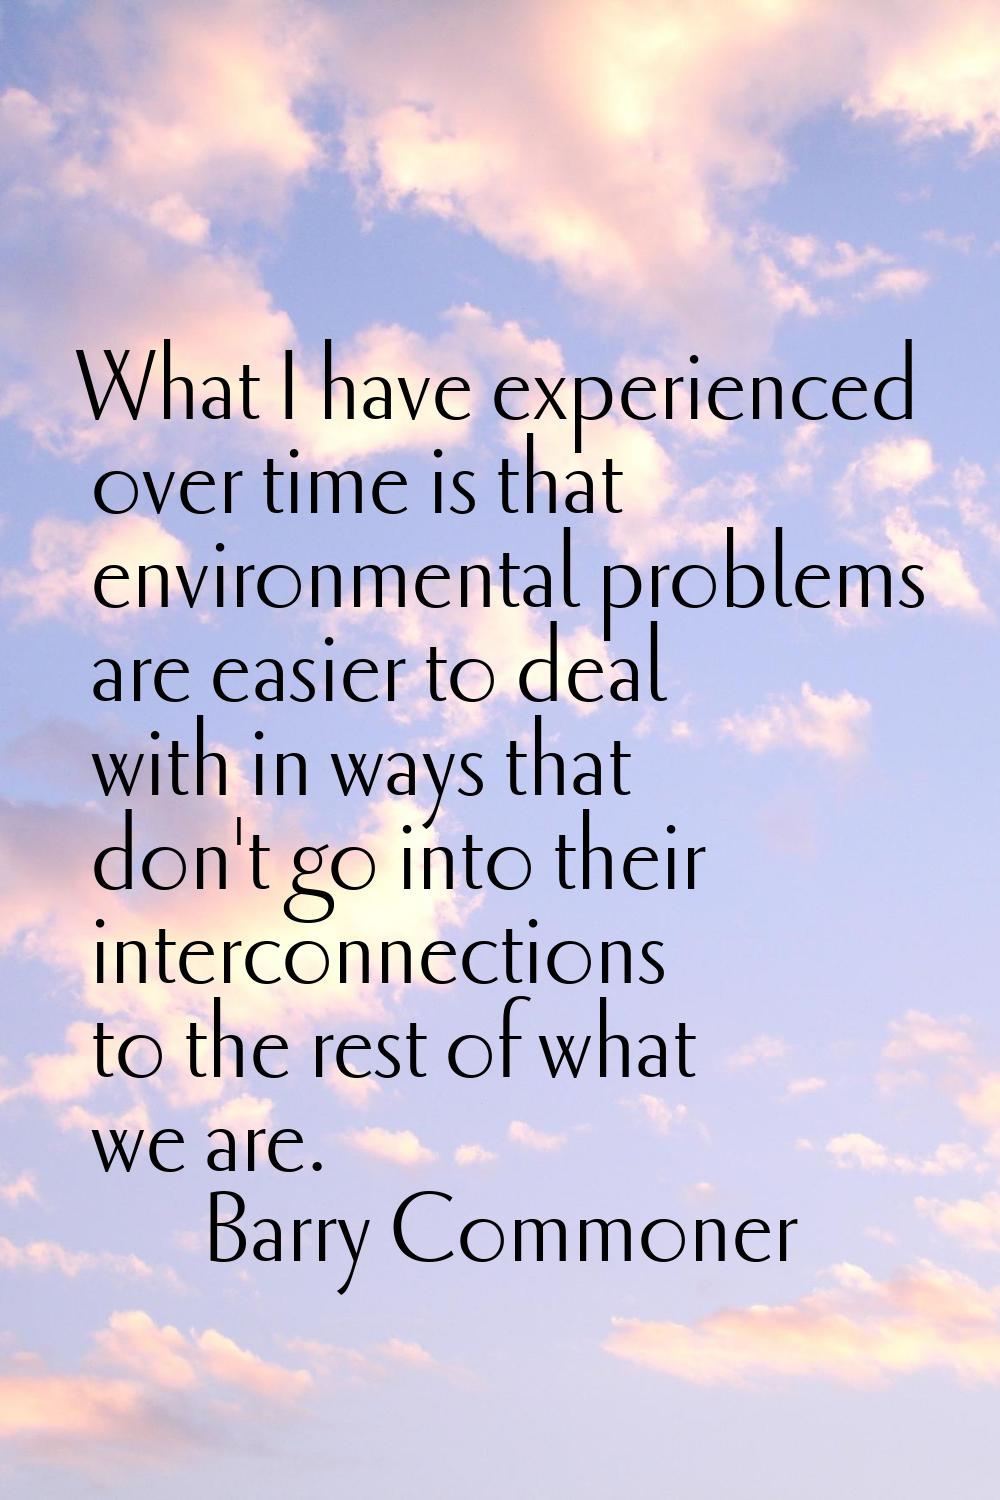 What I have experienced over time is that environmental problems are easier to deal with in ways th